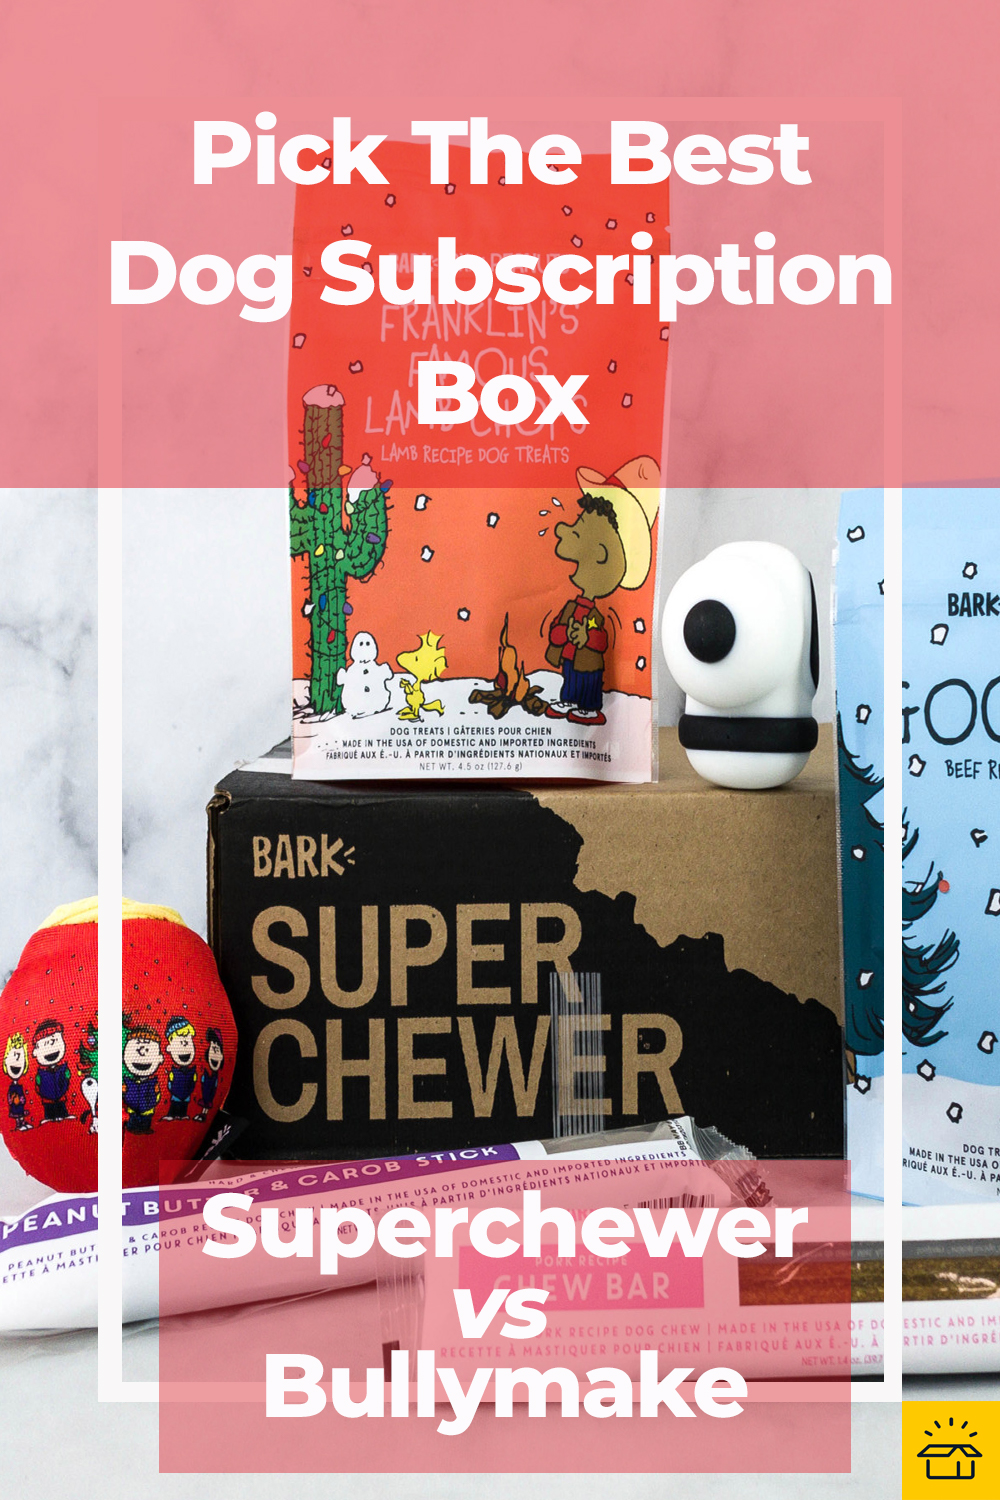 Bullymake Box Reviews: Get All The Details At Hello Subscription!